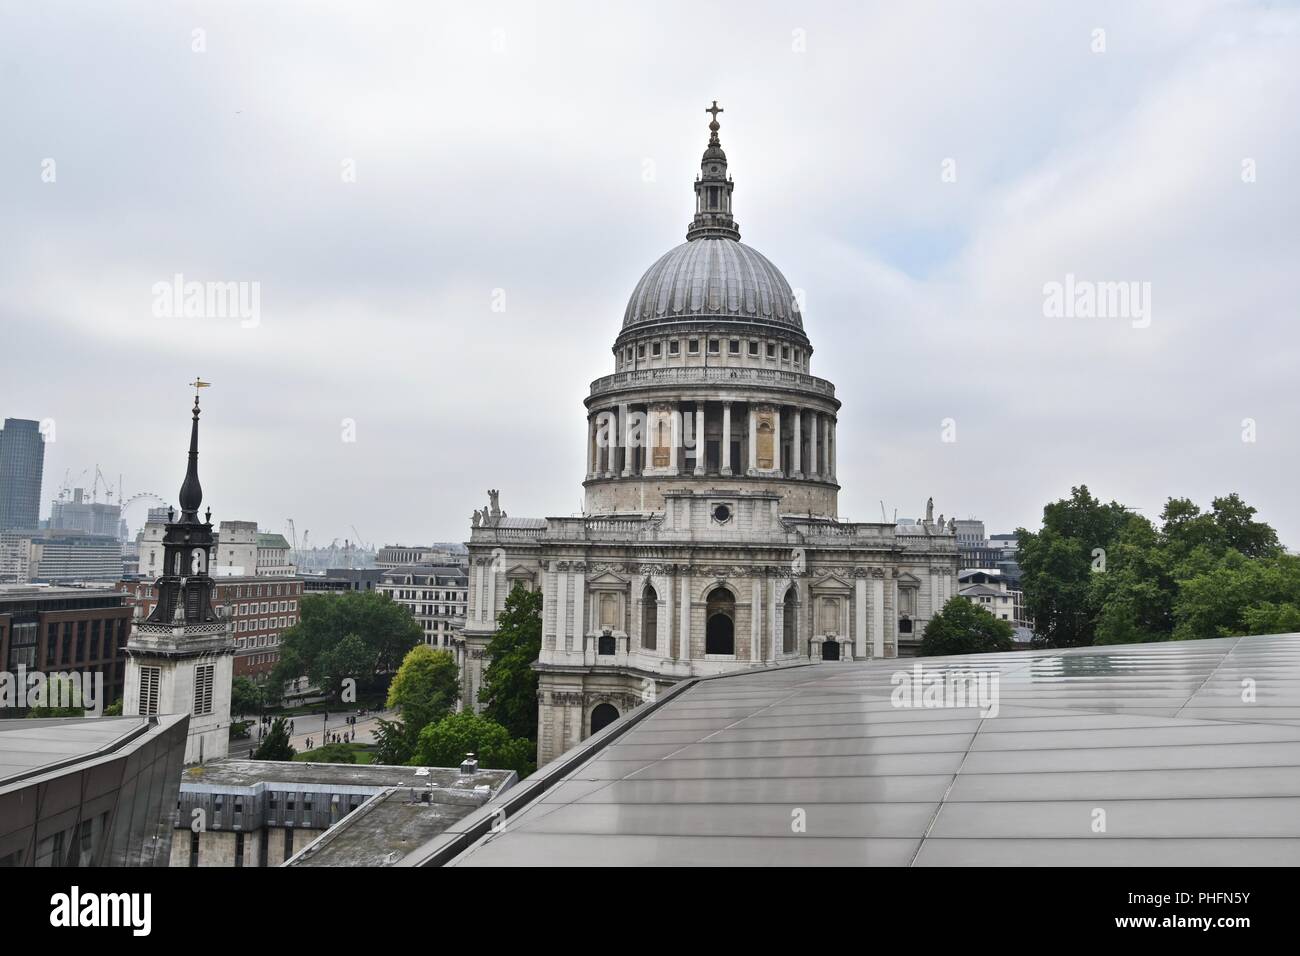 Saint Paul’s Cathedral seen from One New Change, City of London, England, United Kingdom Stock Photo